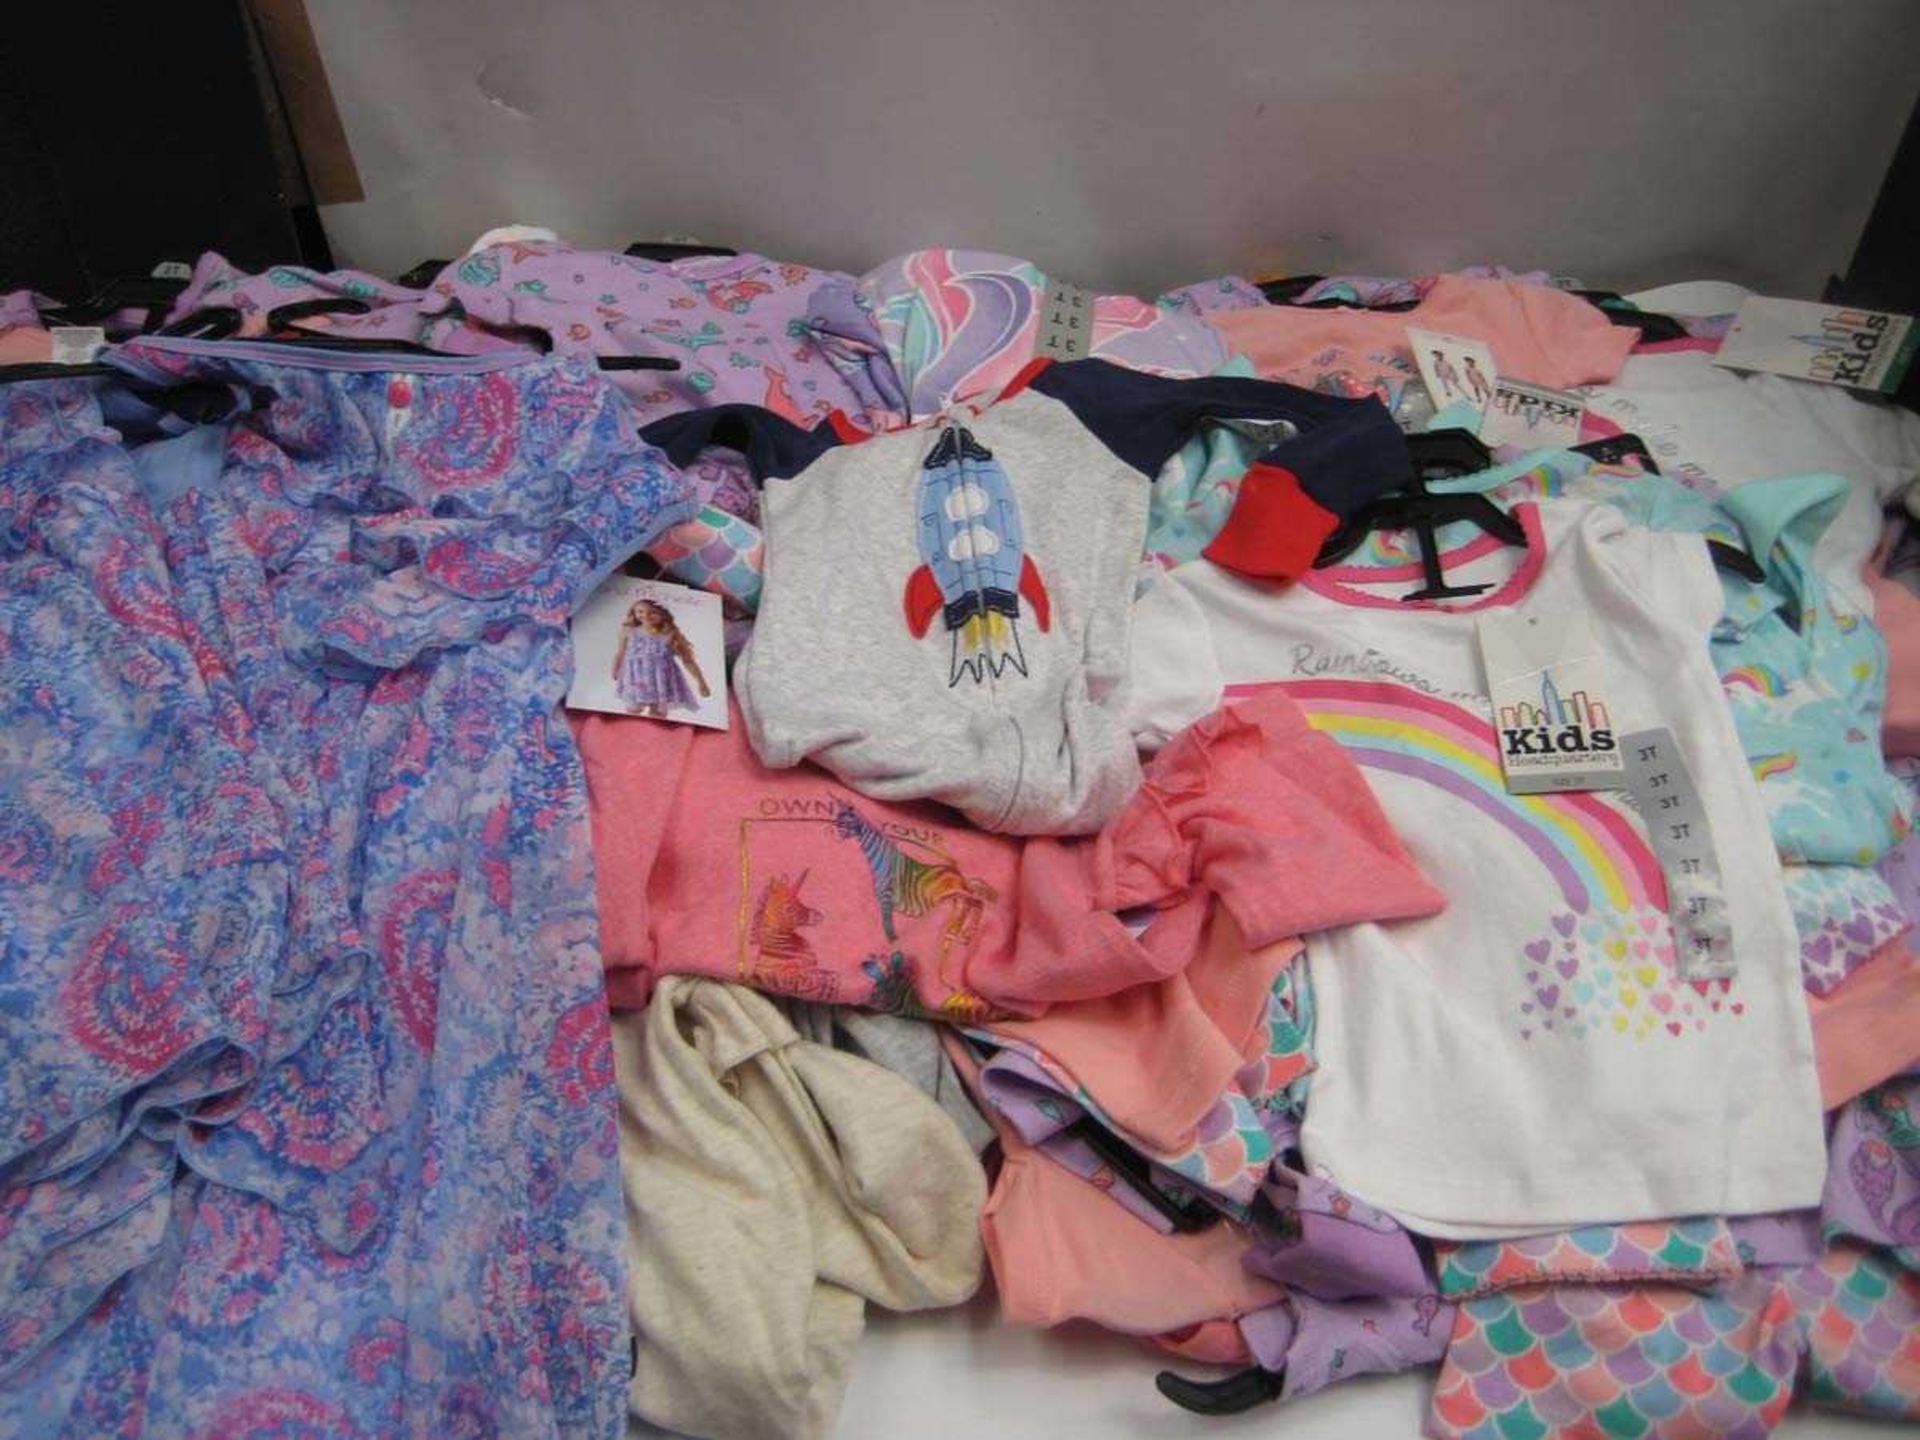 A bag containing a large quantity of Children's Clothing in various sizes.